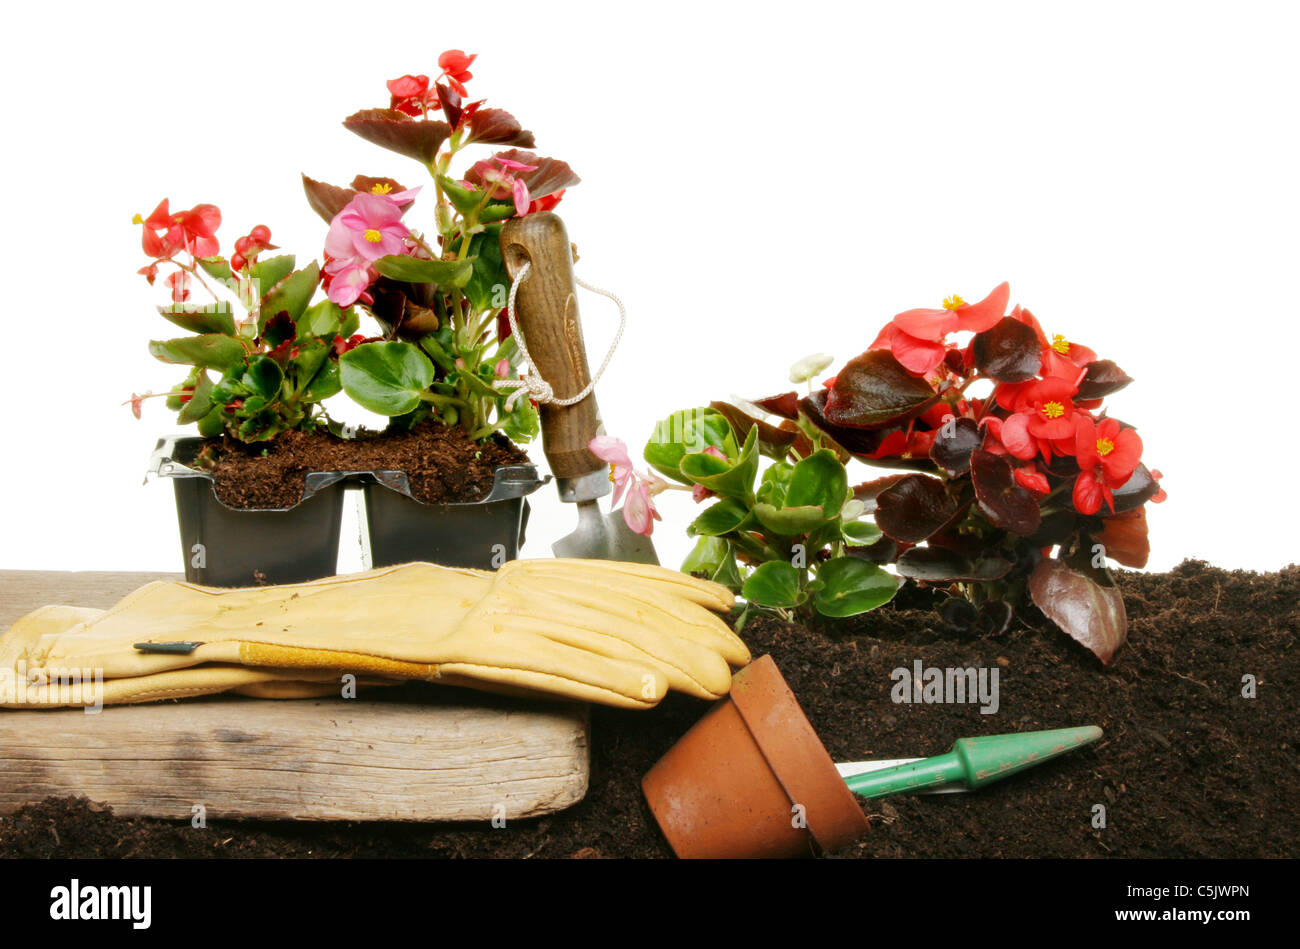 Planting Summer bedding plants from pots into soil with gardening gloves and tools Stock Photo